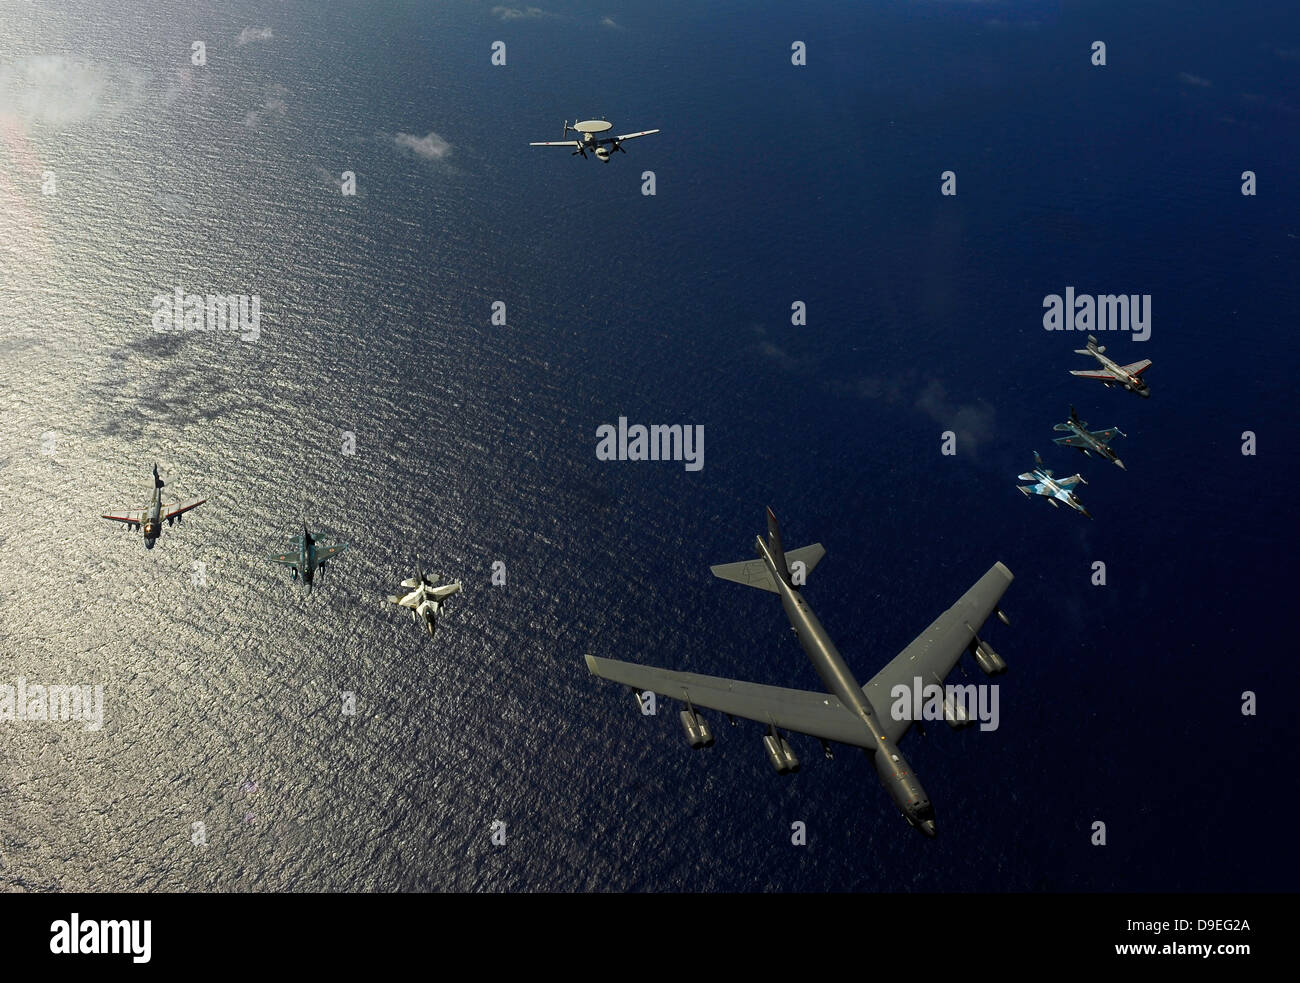 A U.S. Air Force B-52 Stratofortress aircraft leads a formation of aircraft. Stock Photo